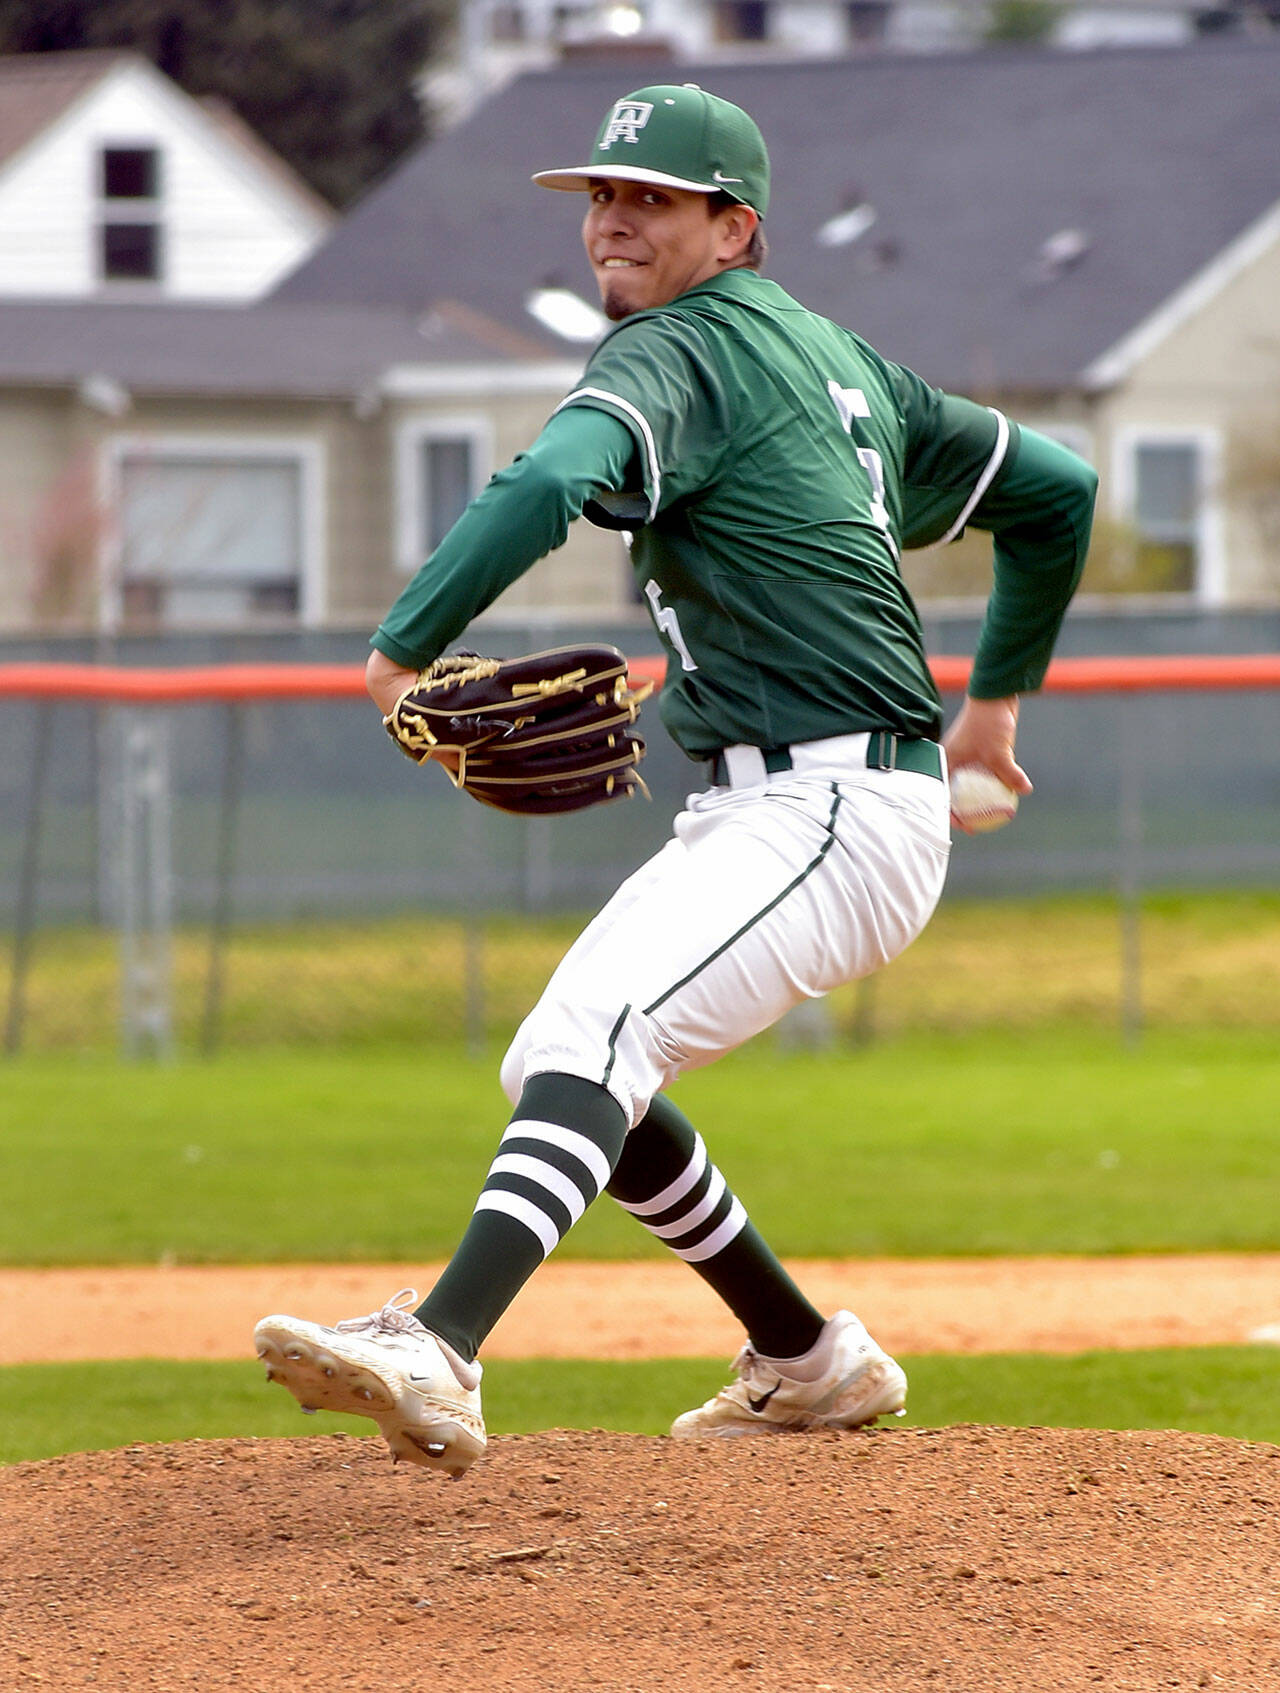 Port Angeles pitcher Brian Guttormsen throws in the first inning against Peninsula on Saturday at Port Angeles Civic Field. (KEITH THORPE/PENINSULA DAILY NEWS)